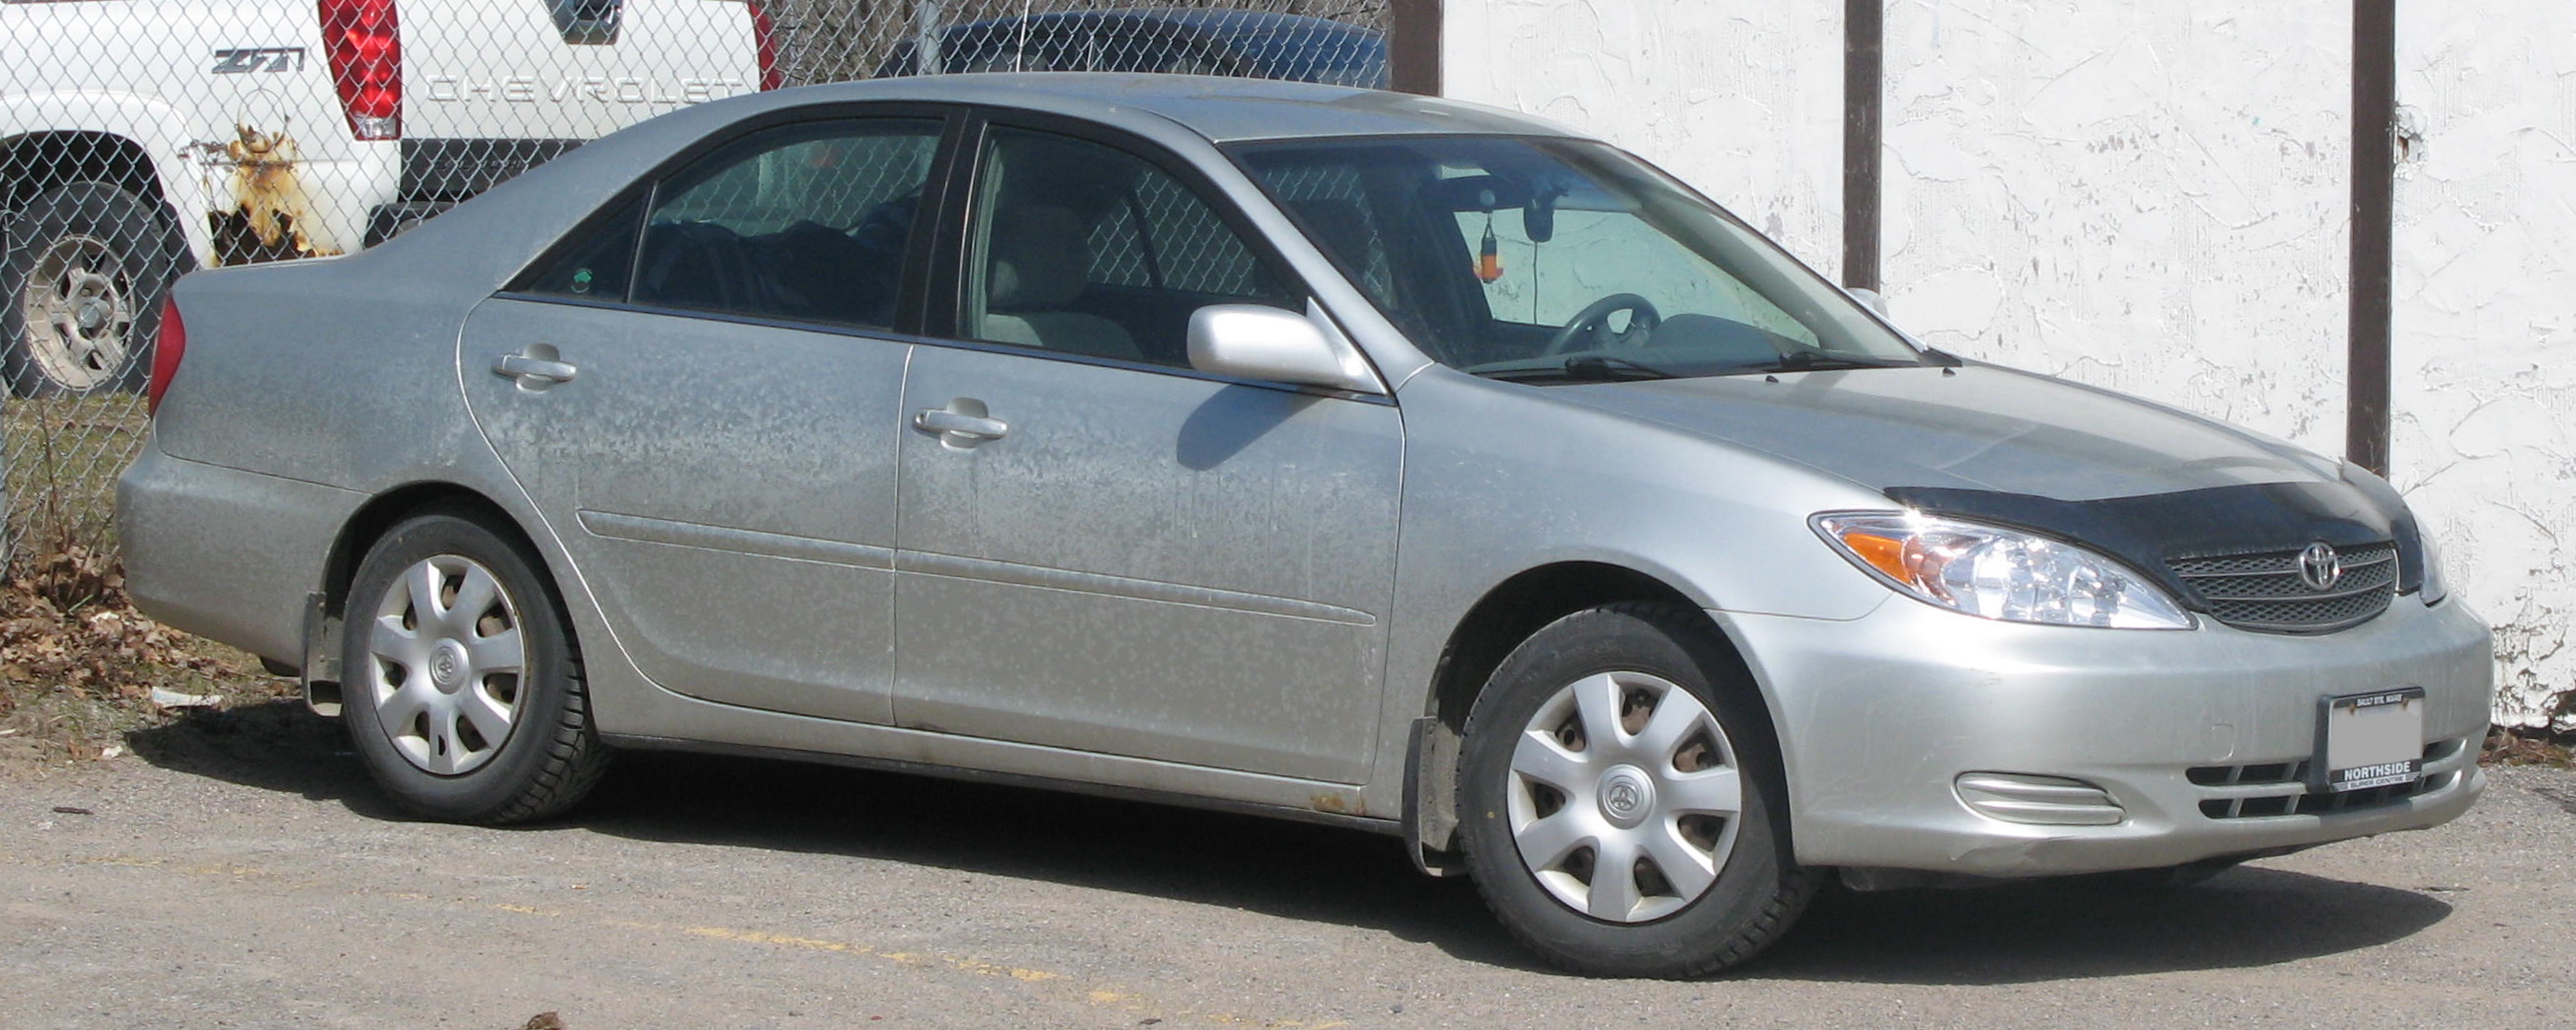 File:2003 Toyota Camry LE, Front Right, 04-24-2020.jpg - Wikimedia Commons